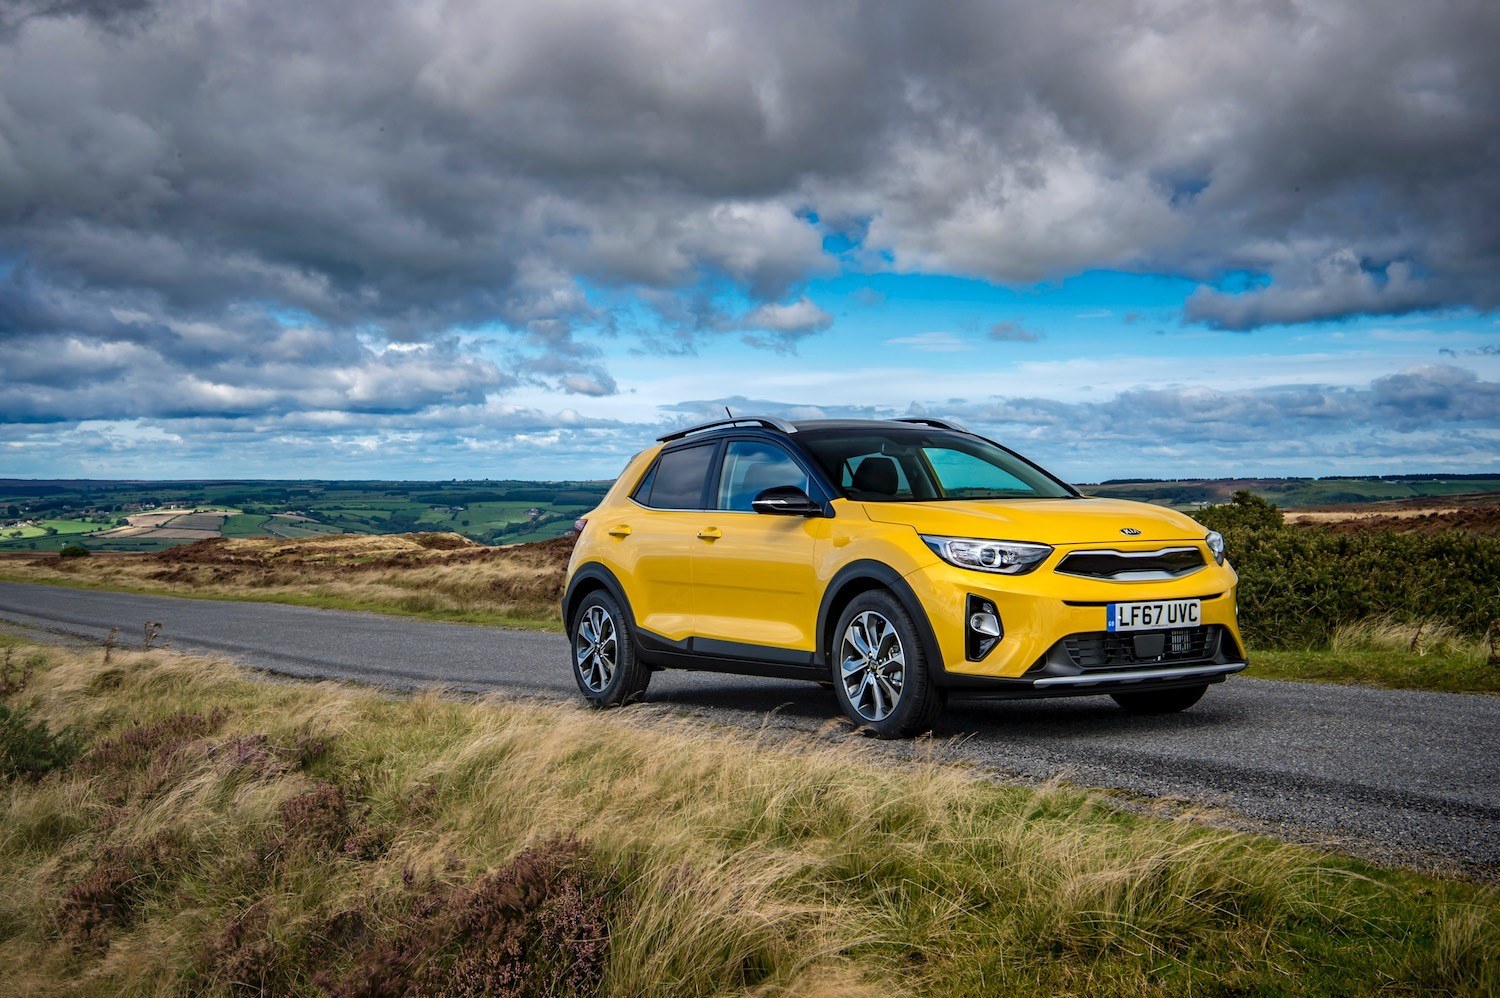 All New Kia Stonic reviewed by Tom Scanlan for Drive 18